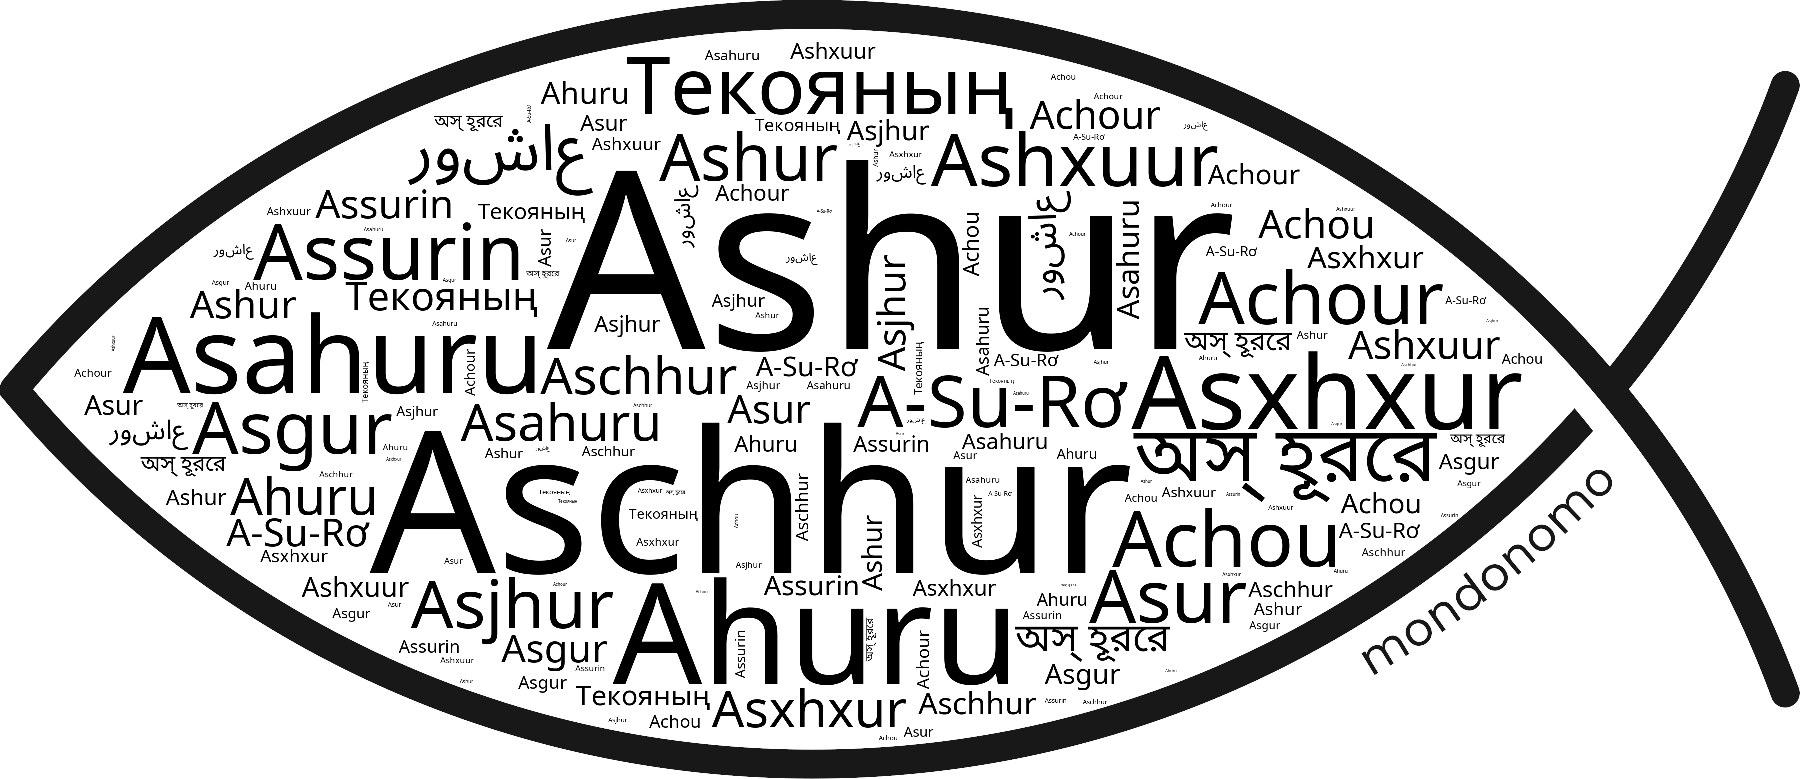 Name Ashur in the world's Bibles